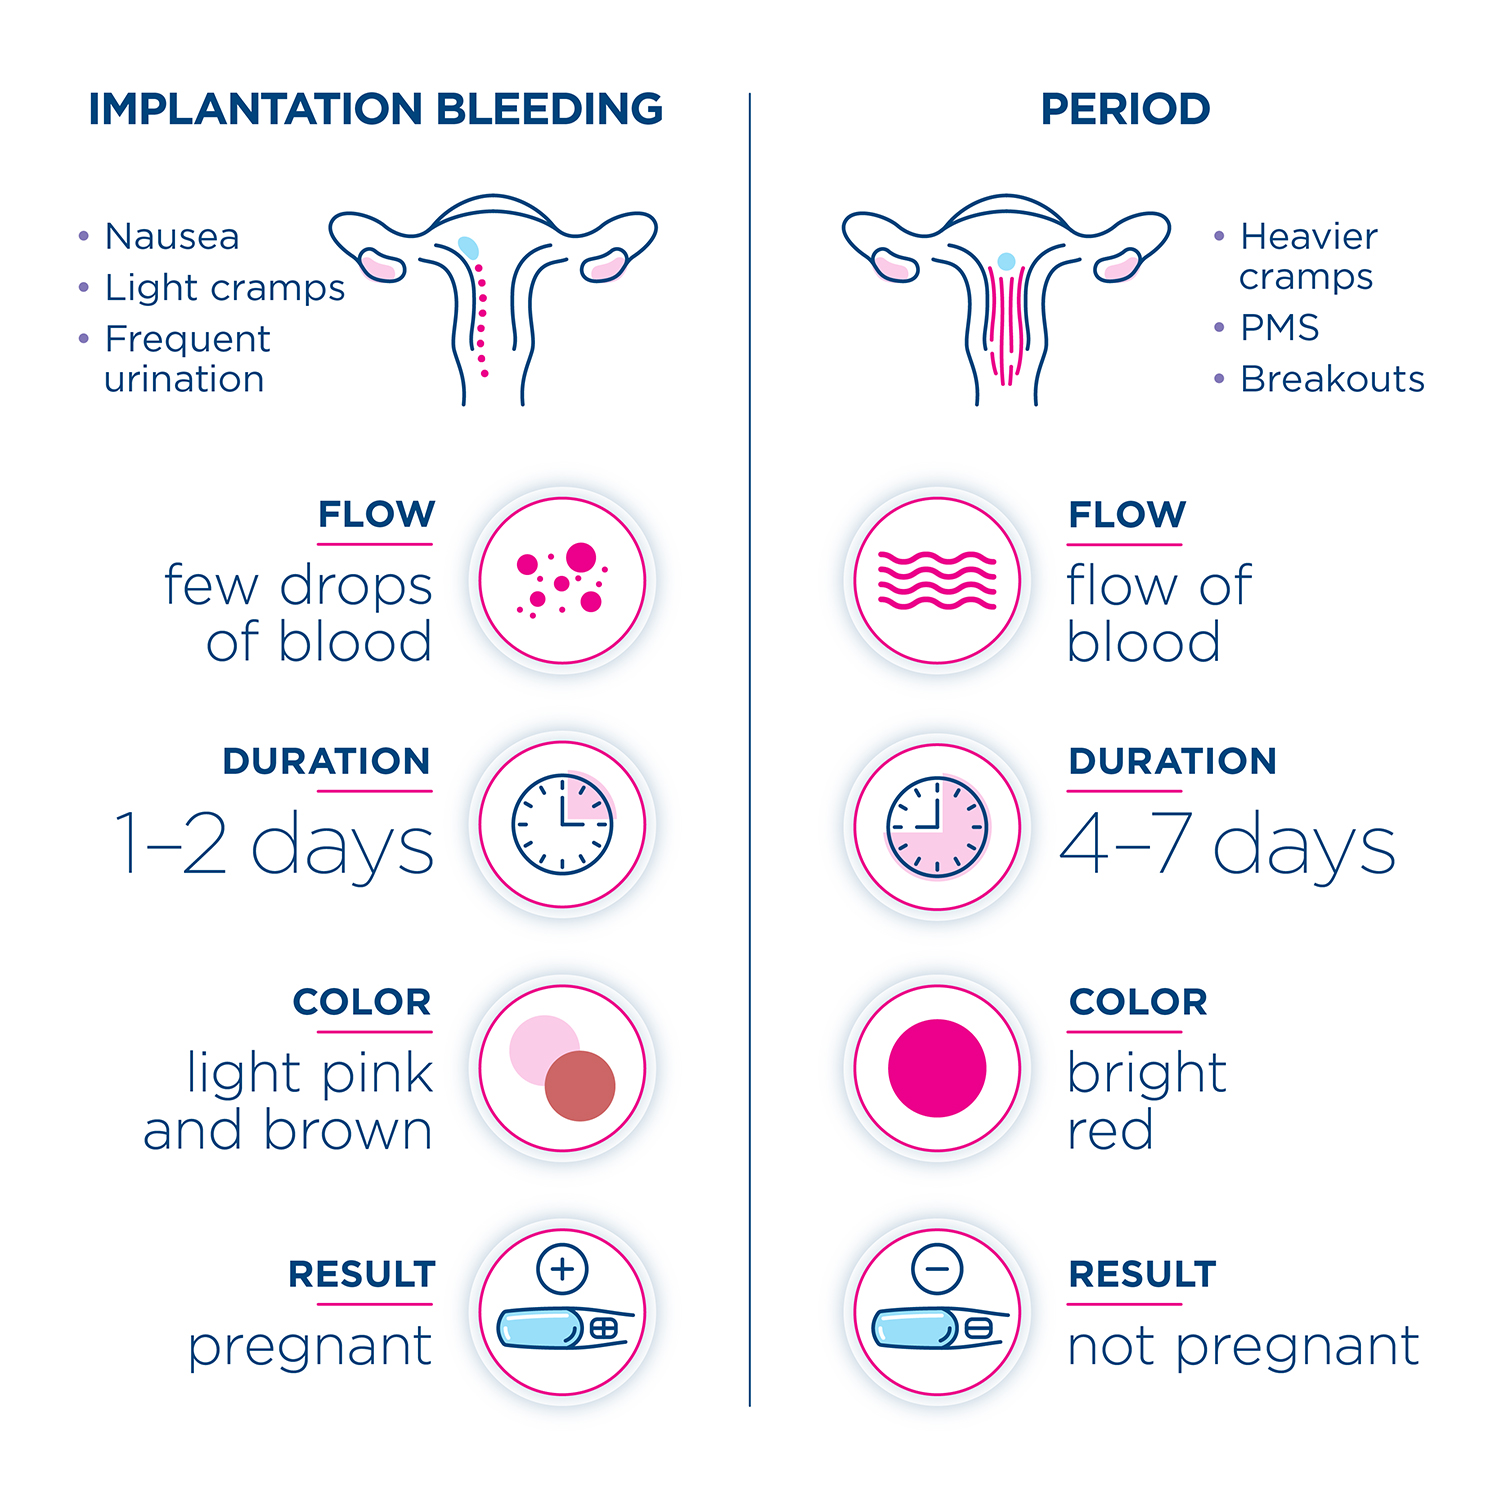 Signs and symptoms to tell the difference of implantation bleeding and your period